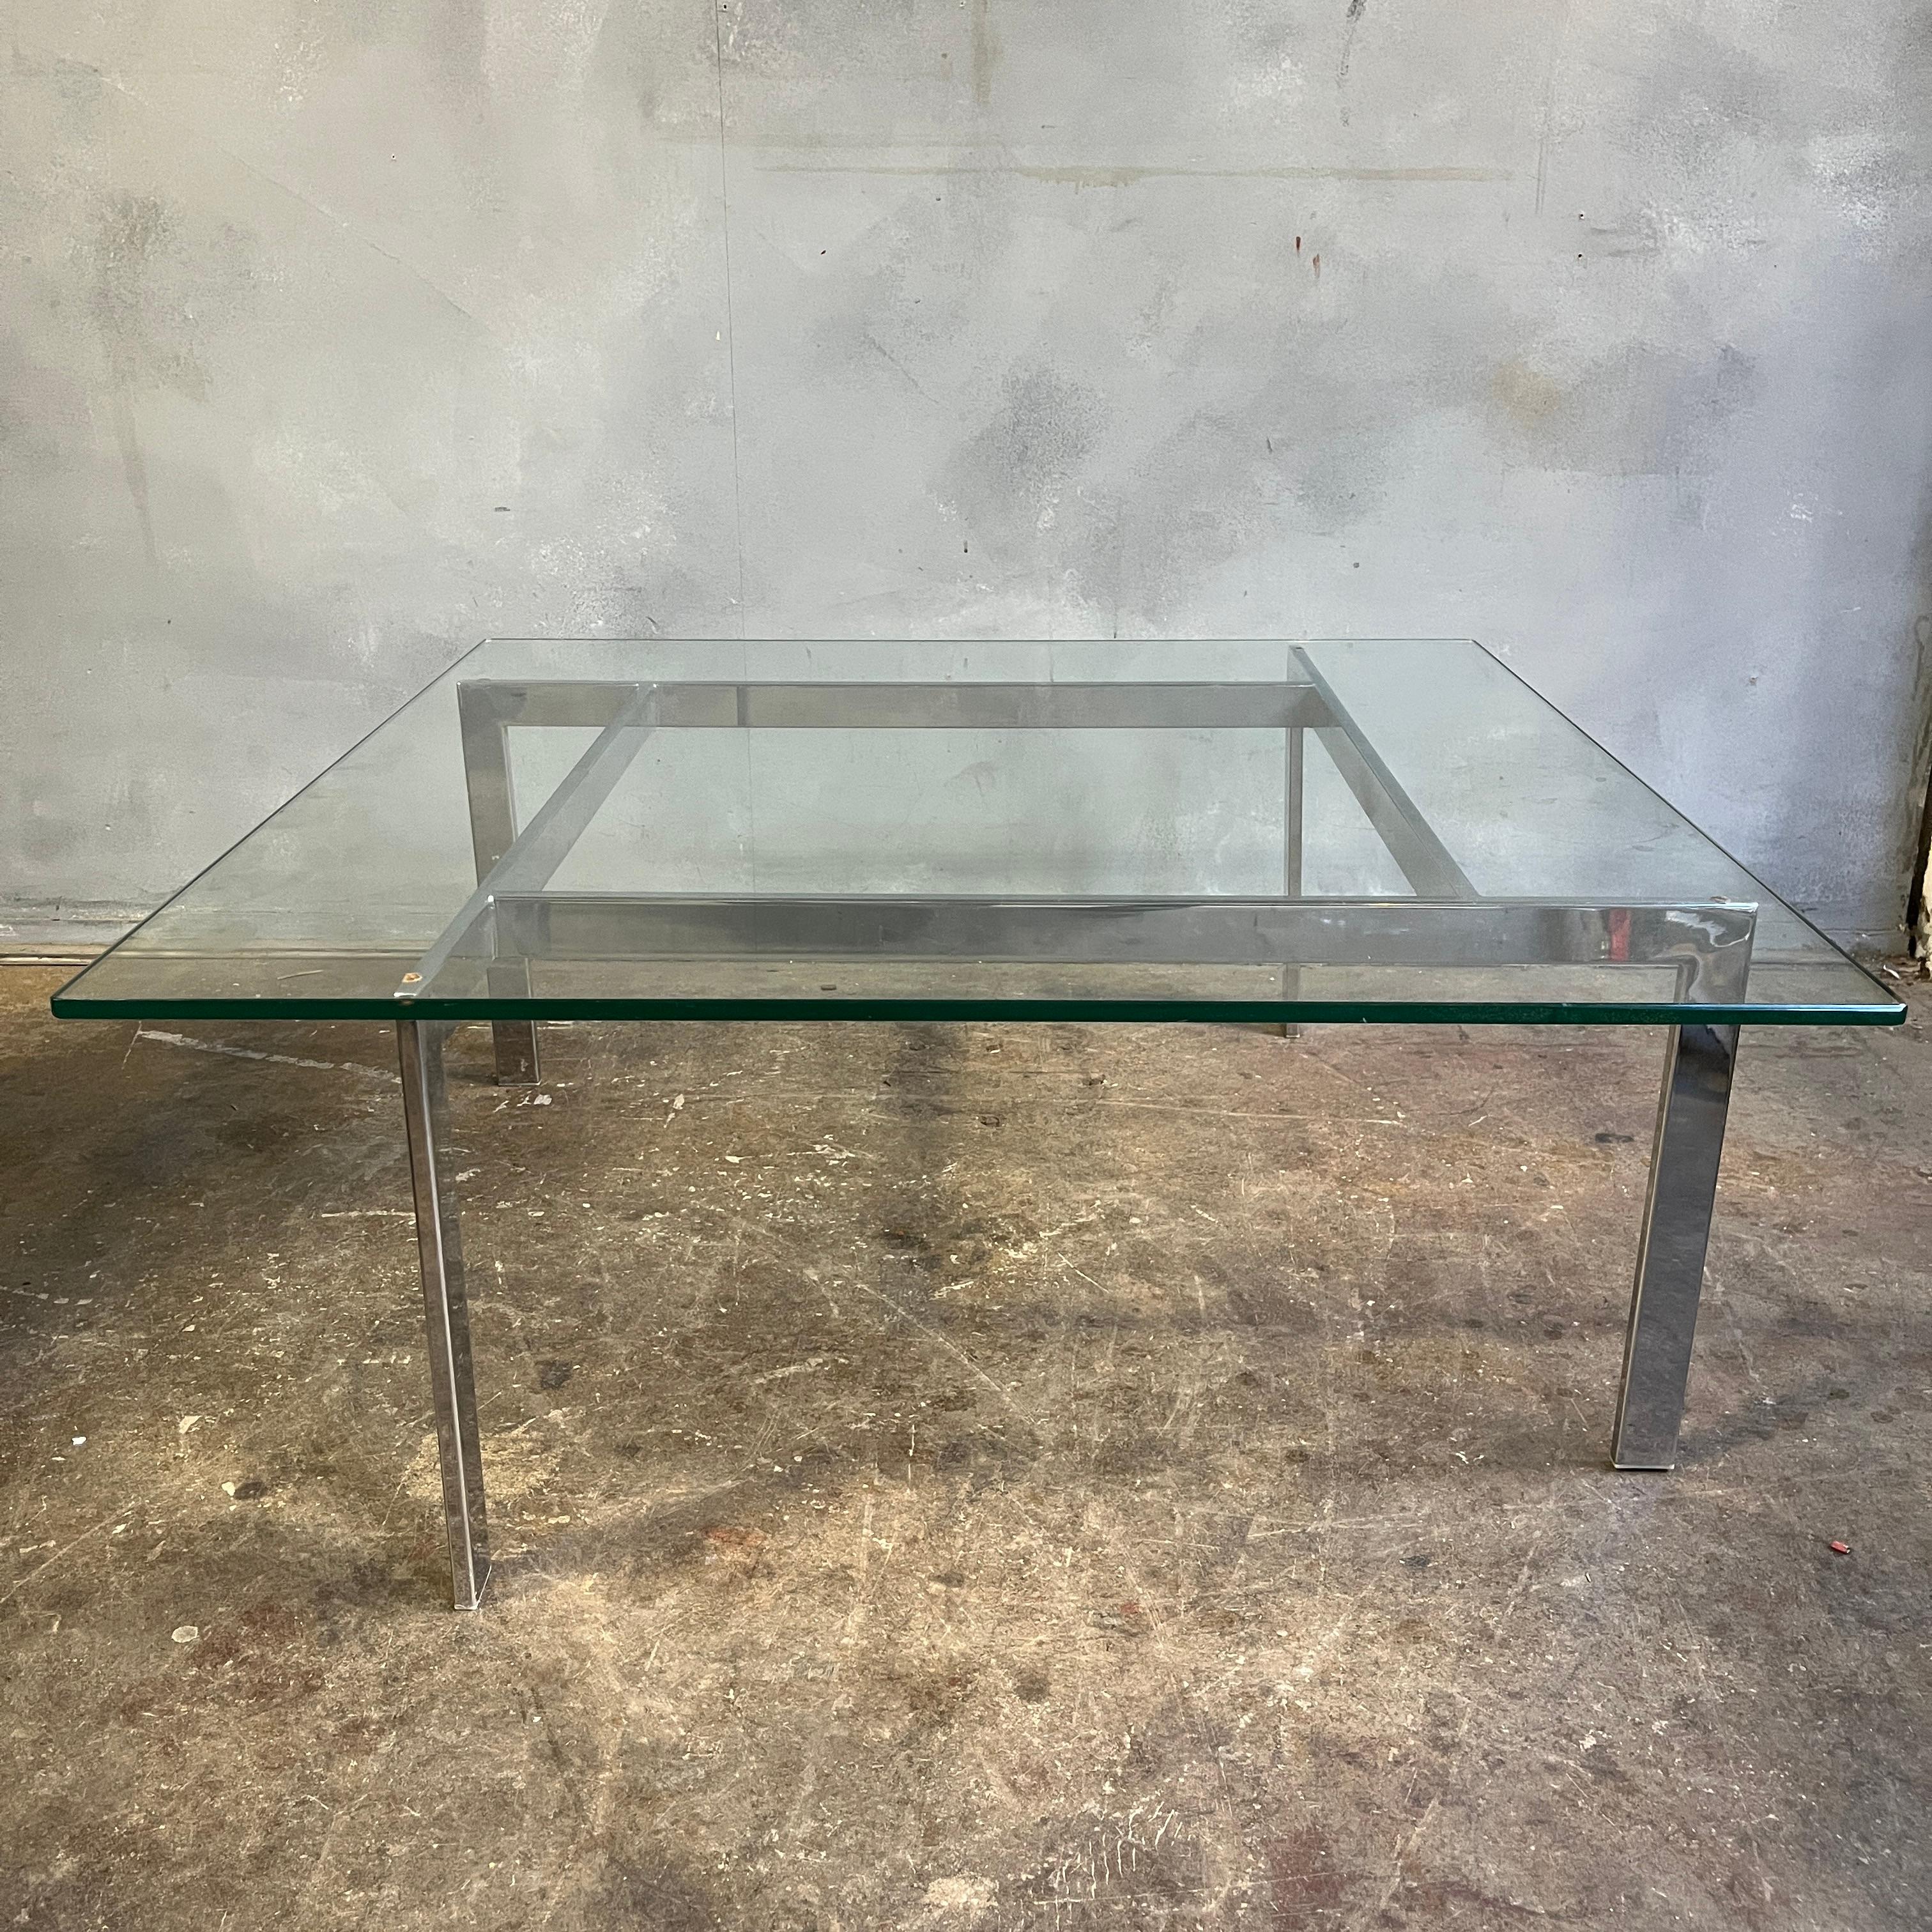 Beautiful chrome coffee table the with thick glass top with green edges. Chrome is very clean. Has the look of Kjærholm or Mies van her Rohe. 